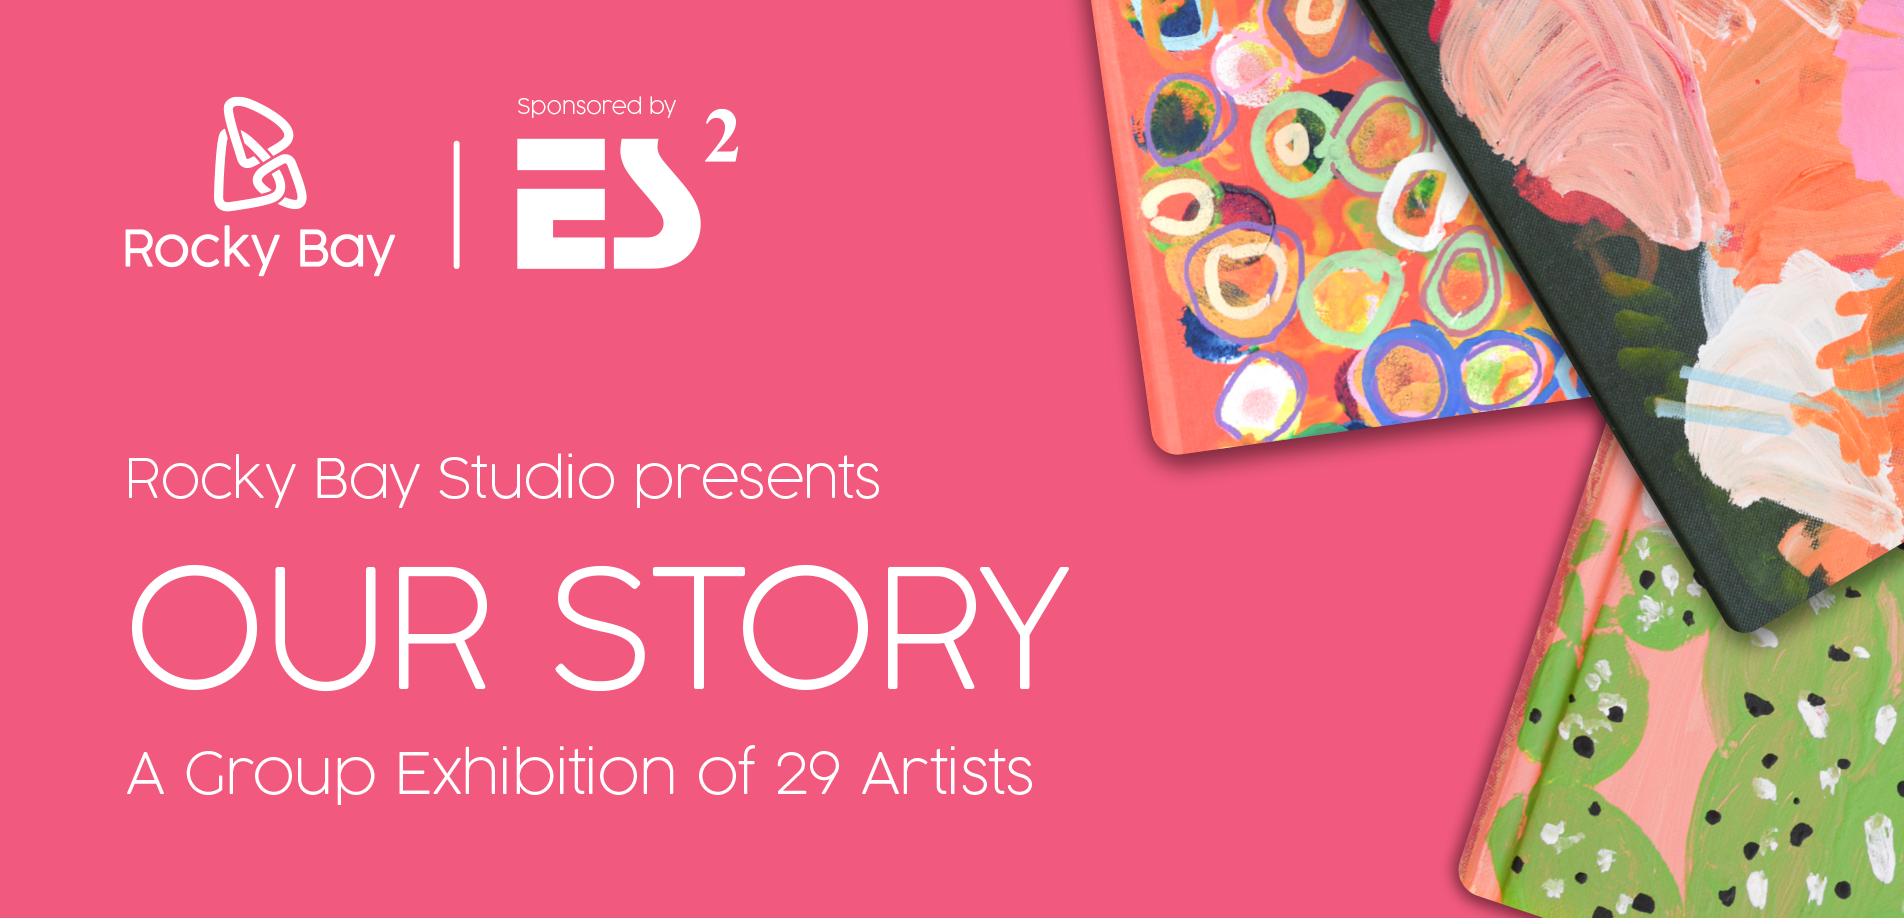 The image is a graphic which features the text 'Rocky Bay Studio presents Our Story.'